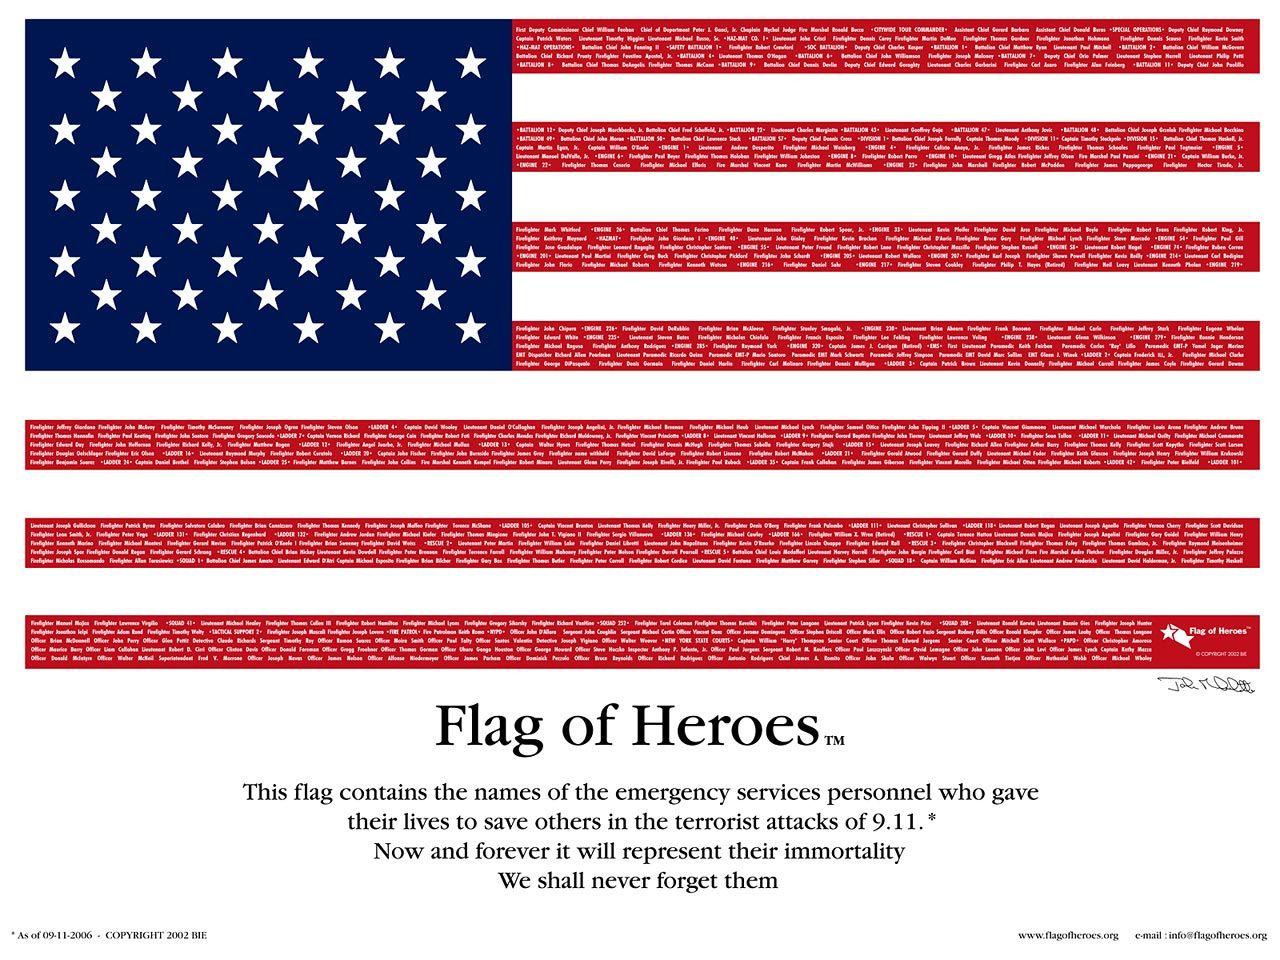 Screen Wallpaper from The Flags of Honor and Heroes